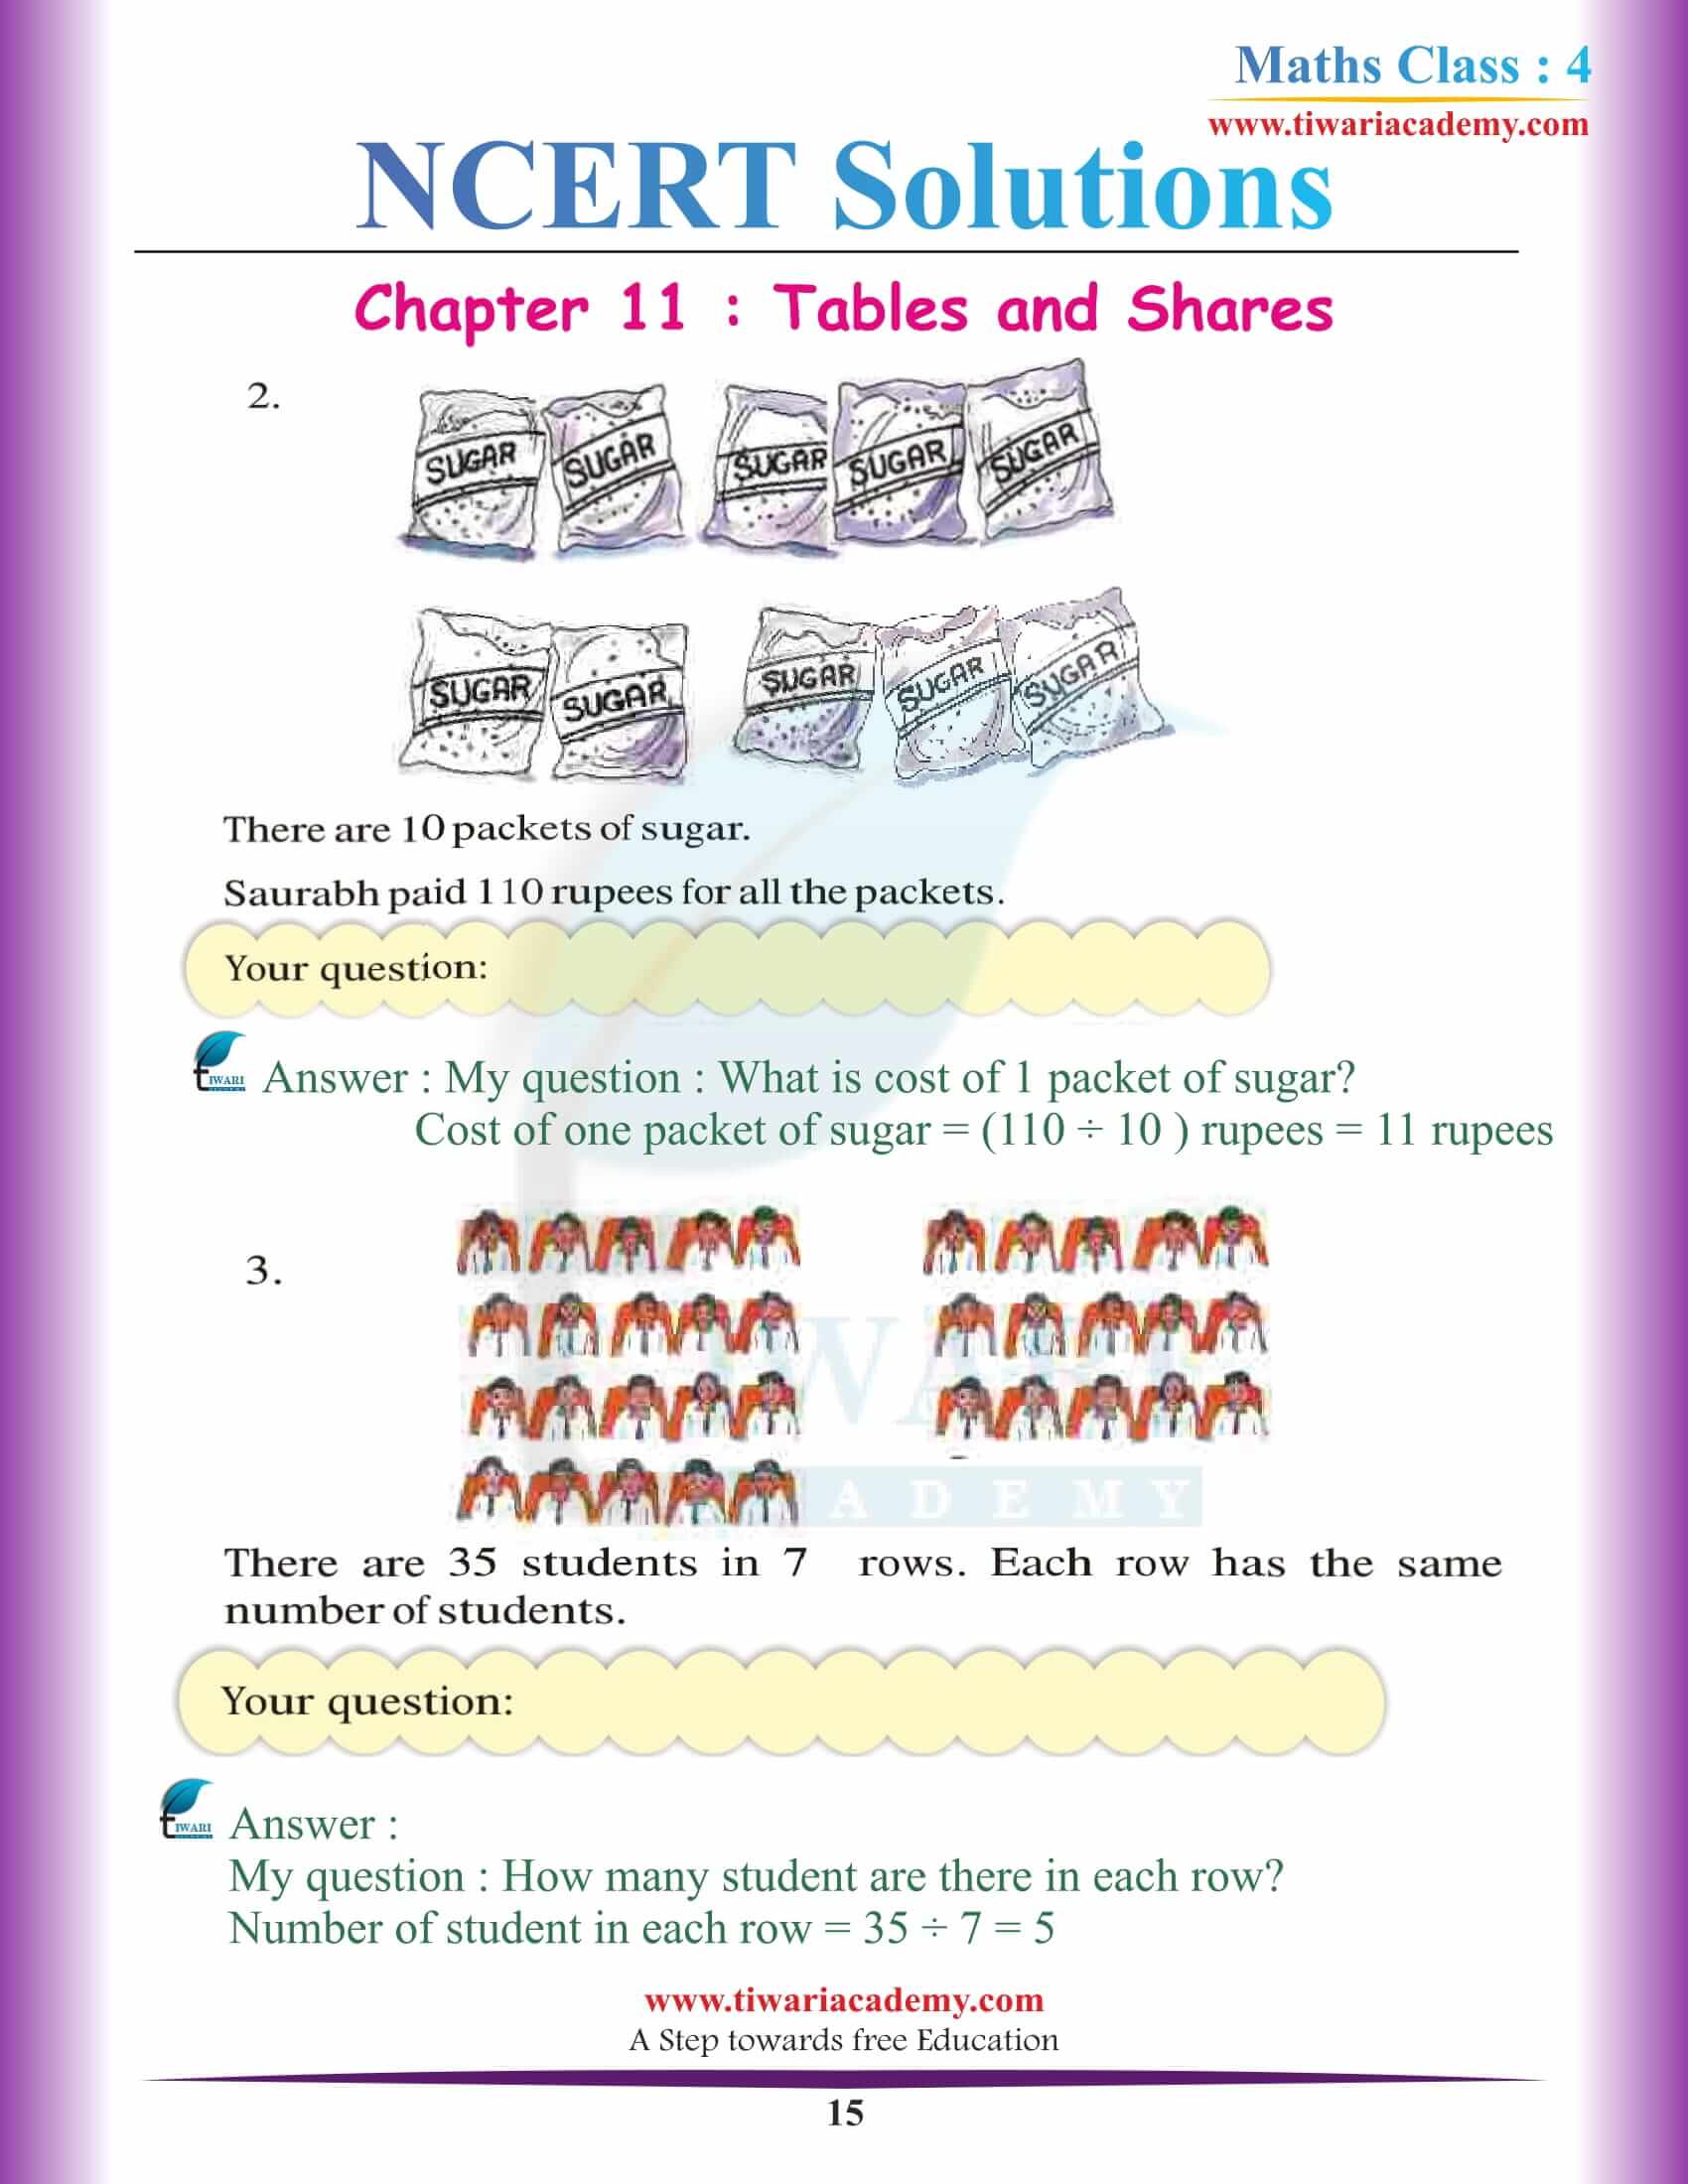 Class 4 Maths NCERT Chapter 11 Solutions free to download